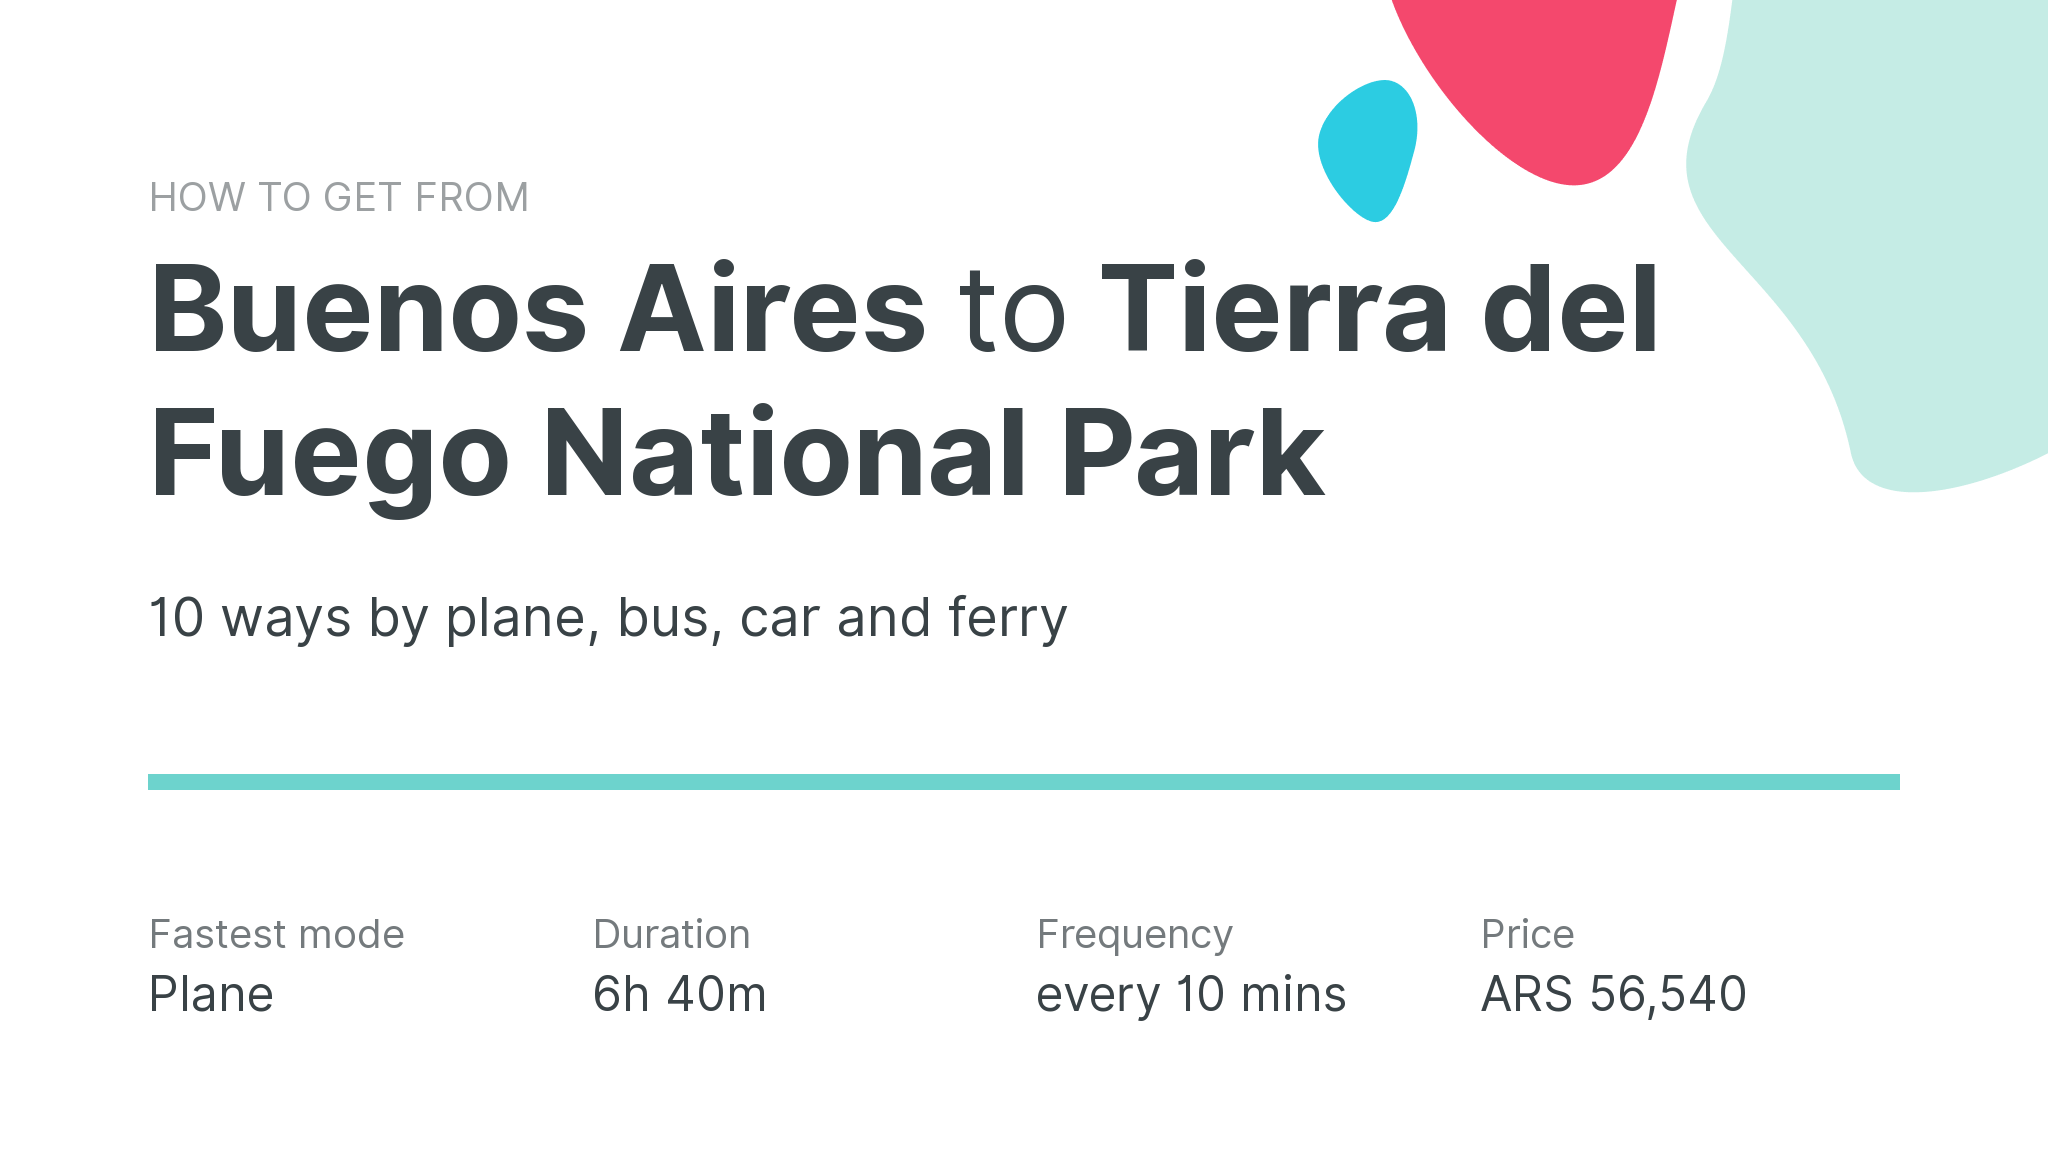 How do I get from Buenos Aires to Tierra del Fuego National Park